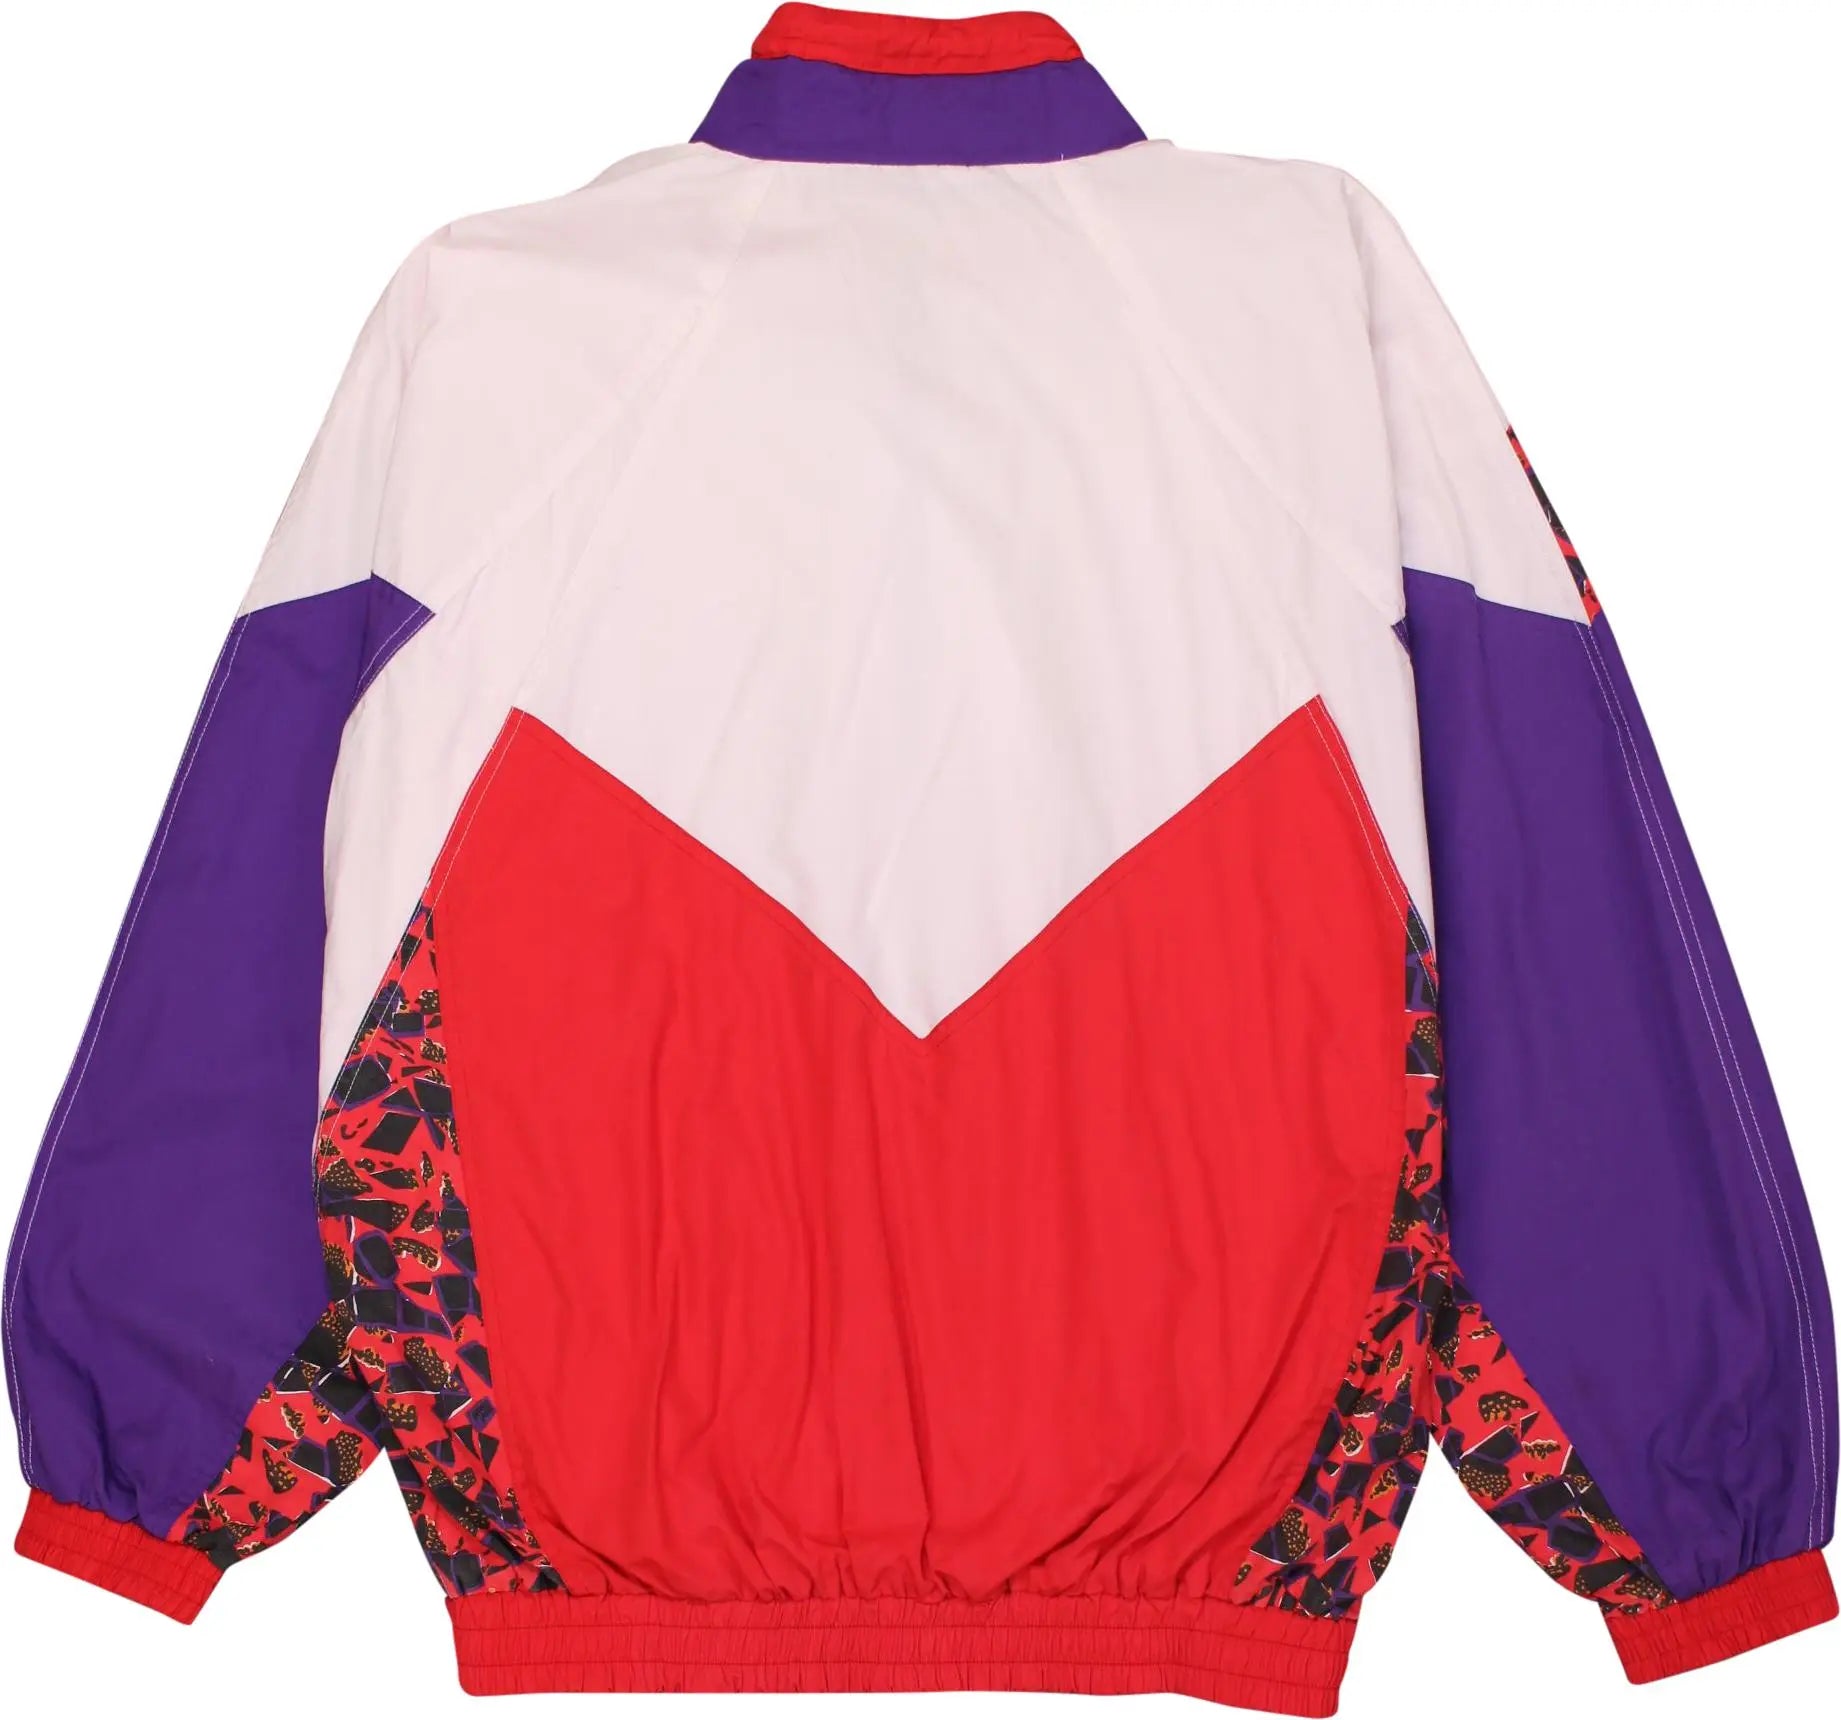 Hummel - Colourful Windbreaker by Hummel- ThriftTale.com - Vintage and second handclothing